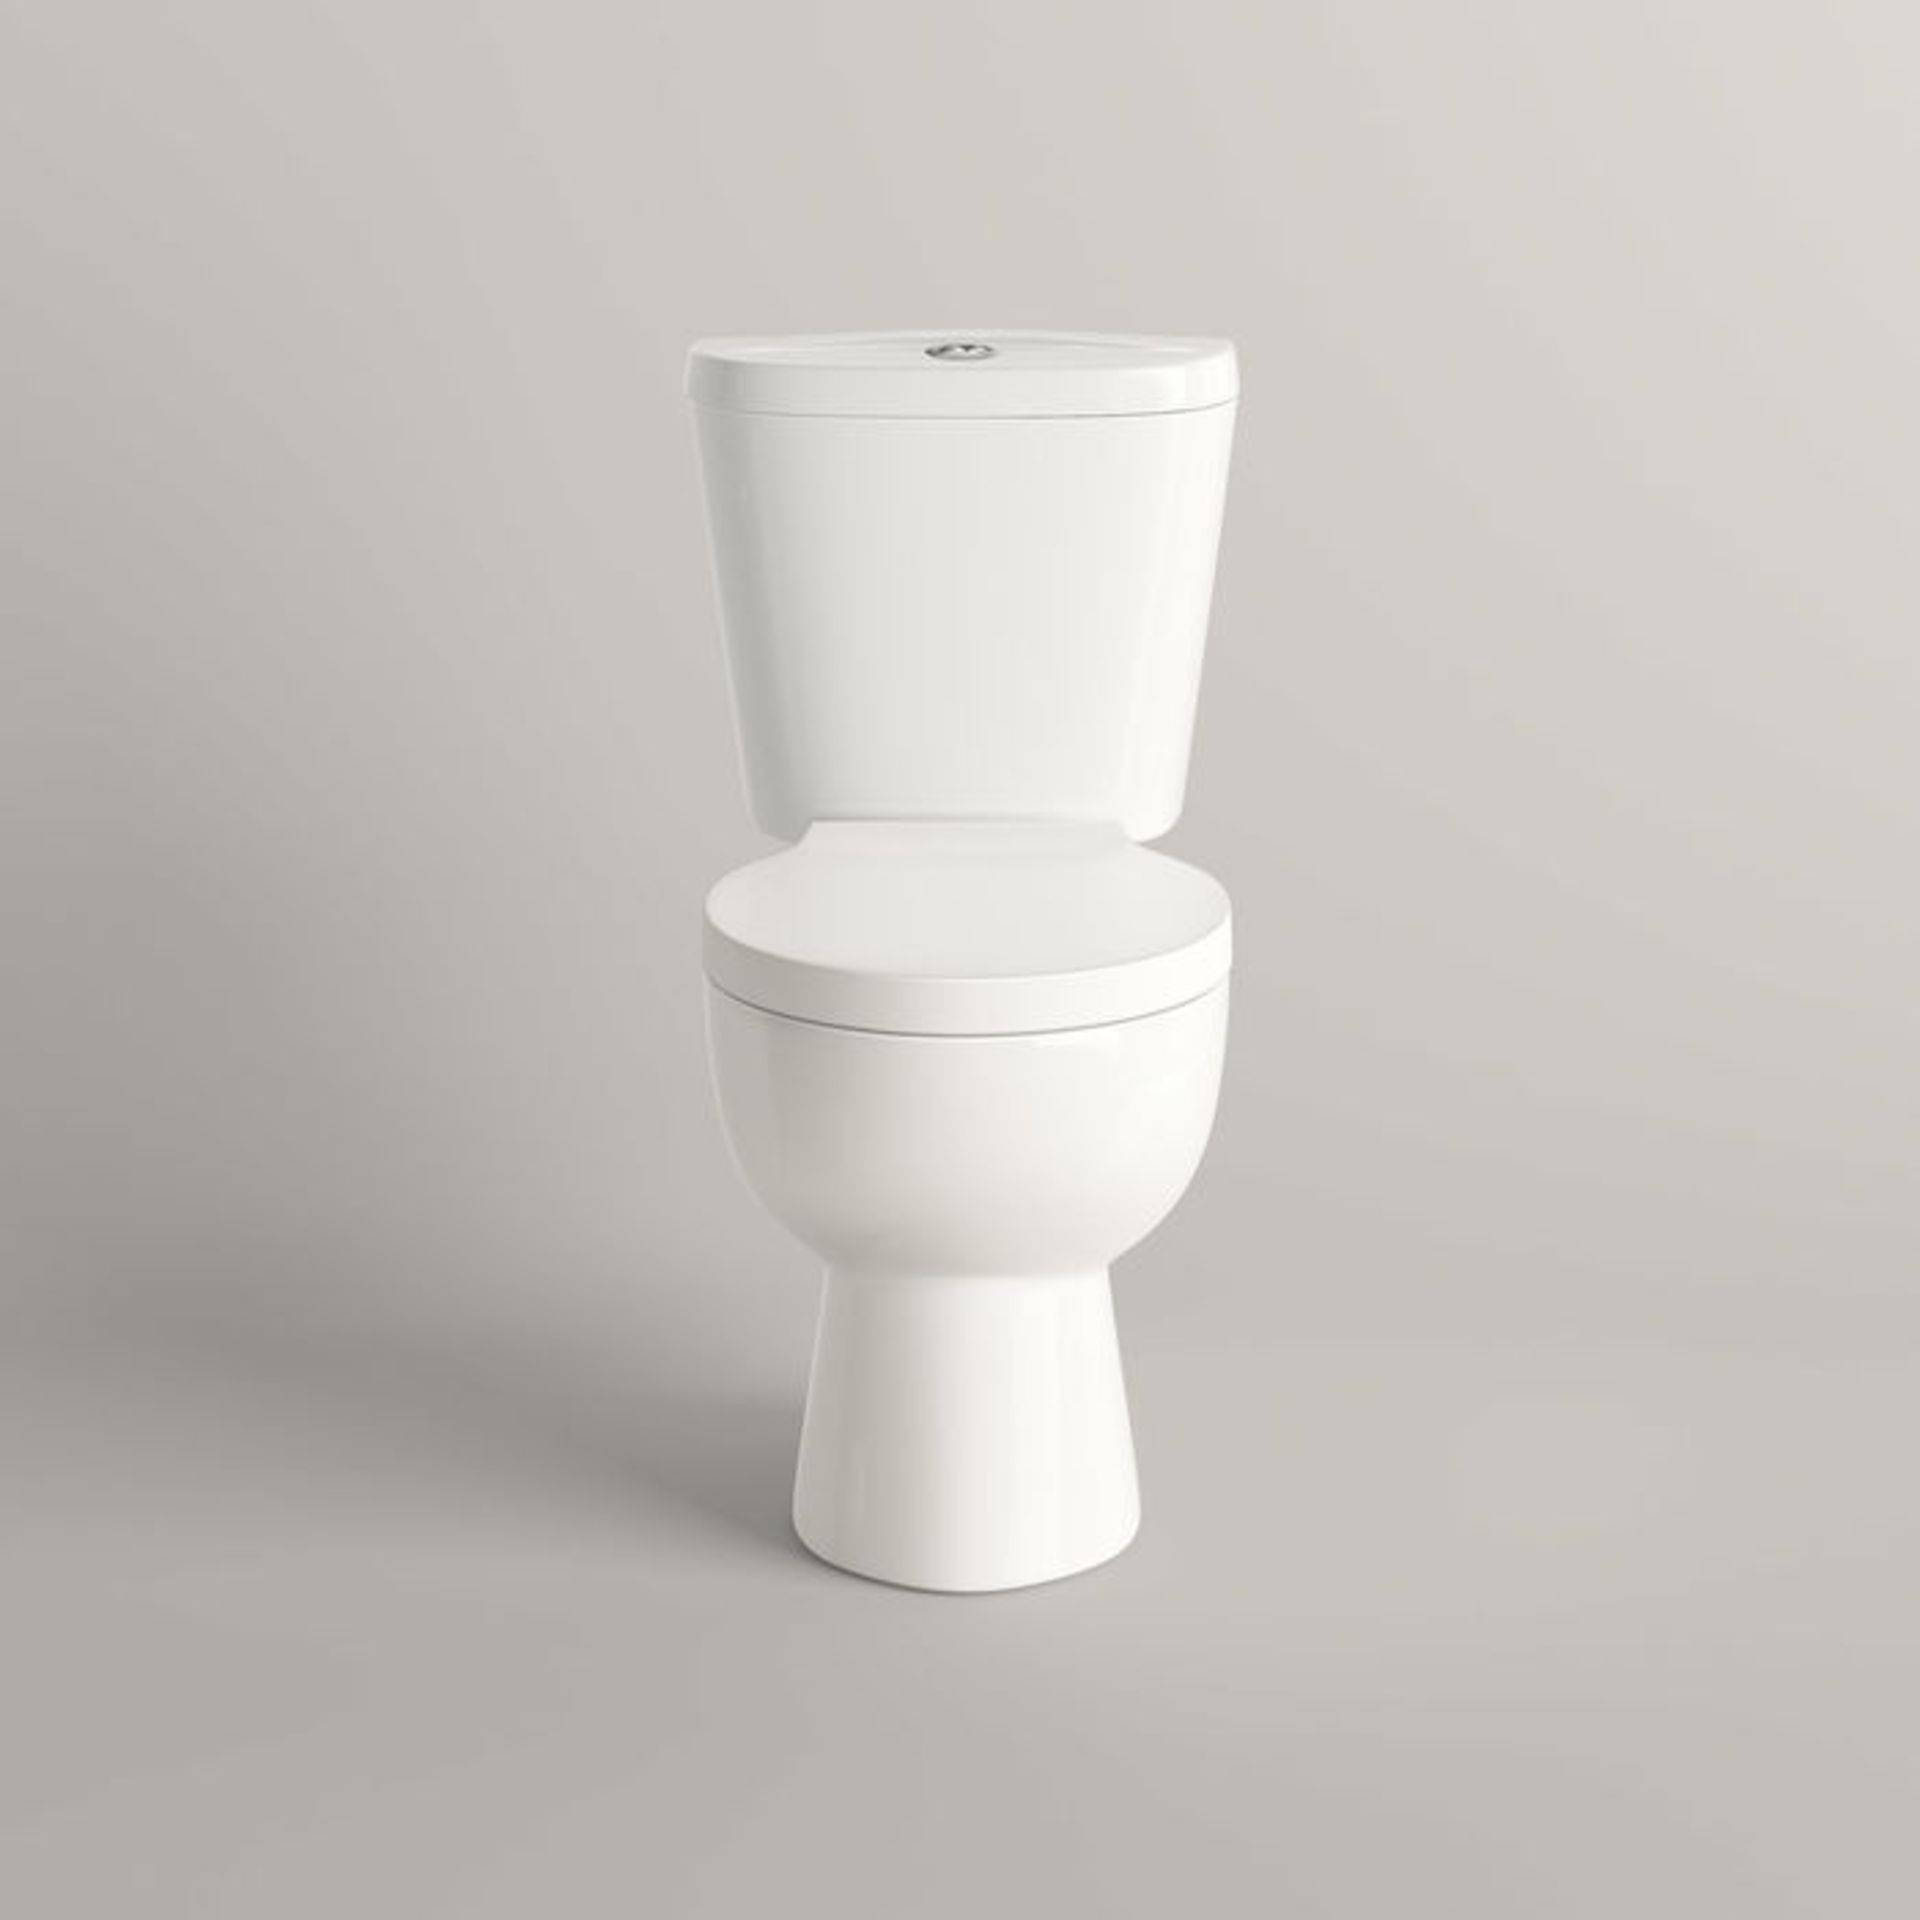 (NV65) Quartz Close Coupled Toilet.. We love this because it is simply great value! Made from W...( - Image 3 of 3